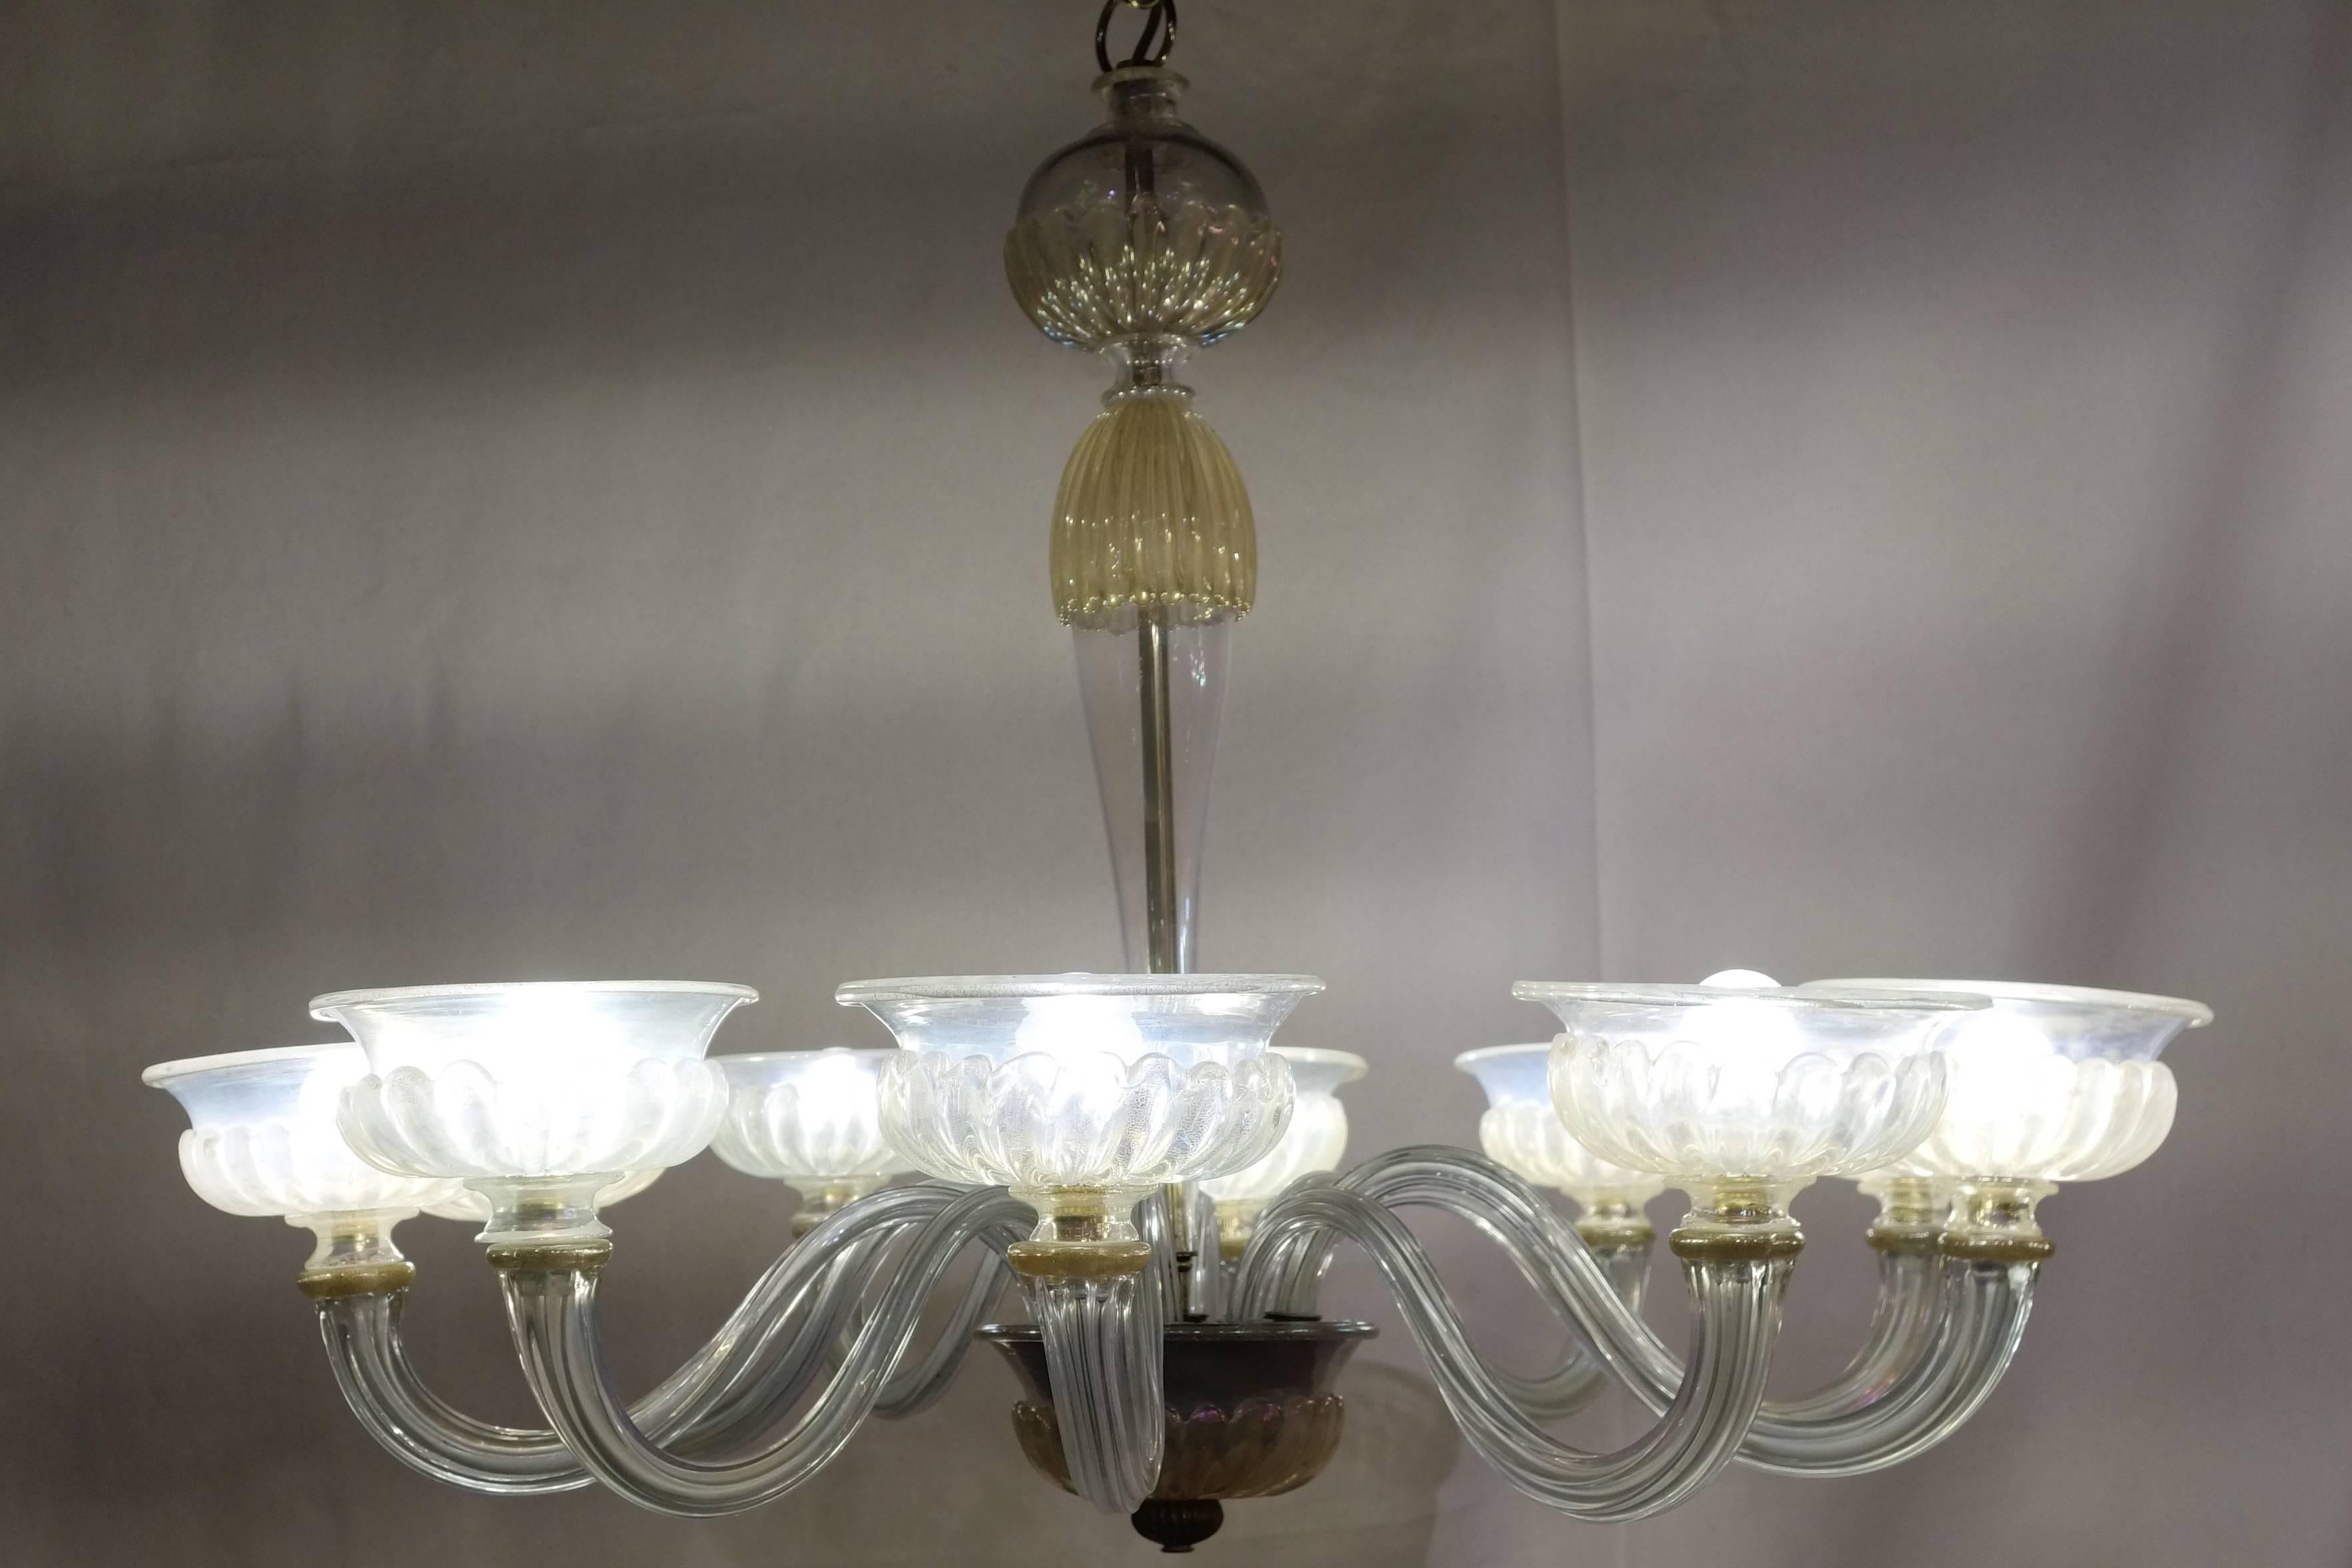 Mid-20th Century Maison Veronese Chandelier Attributed to André Arbus, Opaline Glass, circa 1940 For Sale